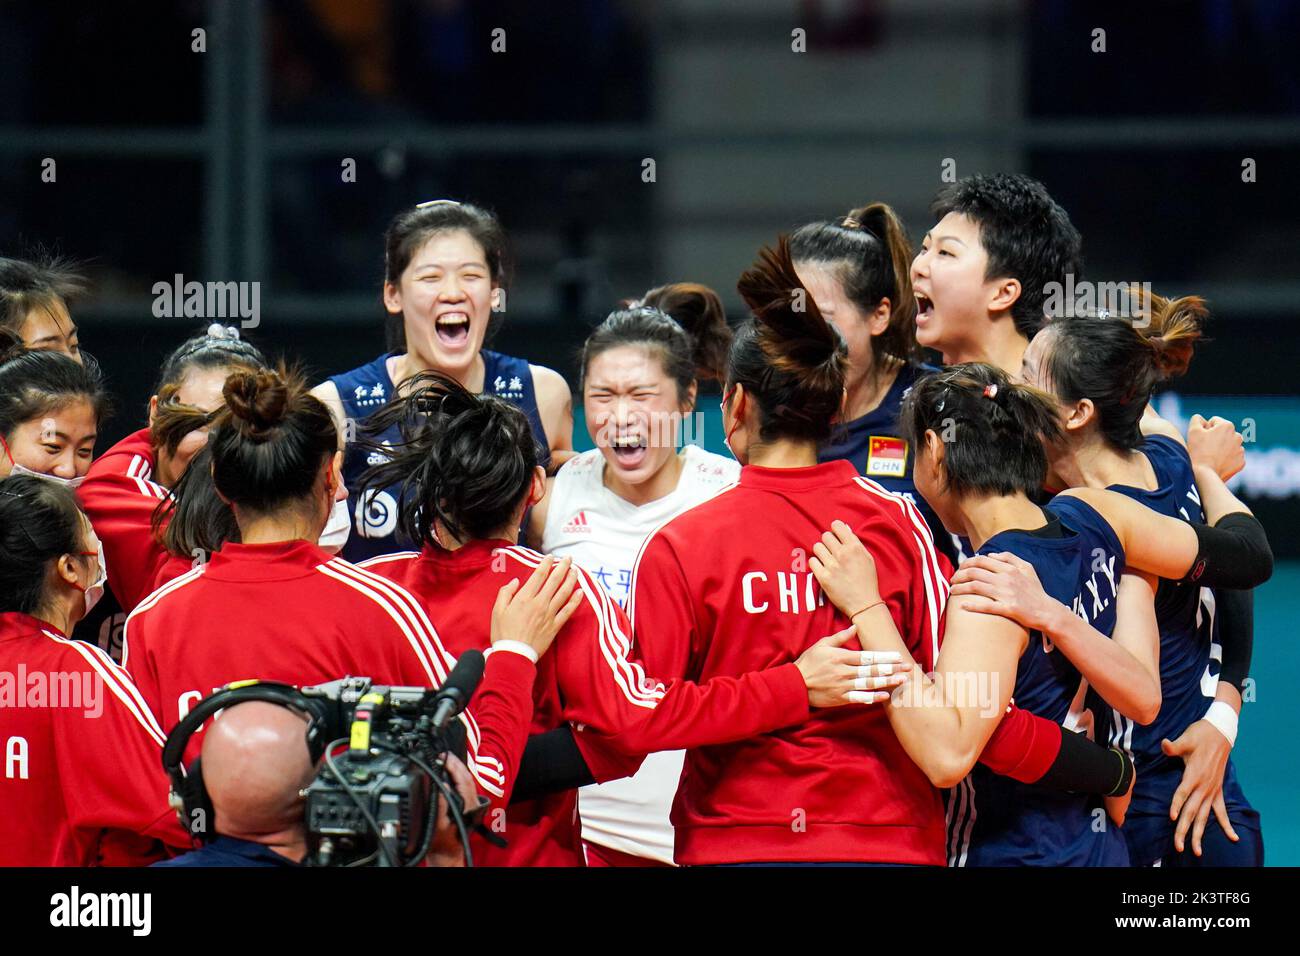 ARNHEM, NETHERLANDS - SEPTEMBER 28: Xinyue Yuan of China, Linyu Diao of China, Hanyu Yang of China, Yi Gao of China, Xiangyu Gong of China, Yuanyuan Wang of China, Ye Jin of China, Yunlu Wang of China, Yizhu Wang of China, Yingying Li of China, Weiyi Wang of China, Xia Ding of China, Mengjie Wang of China, Peiyan Chen of China during the Pool D Phase 1 match between China and Japan on Day 6 of the FIVB Volleyball Womens World Championship 2022 at the Gelredome on September 28, 2022 in Arnhem, Netherlands (Photo by Rene Nijhuis/Orange Pictures) Stock Photo